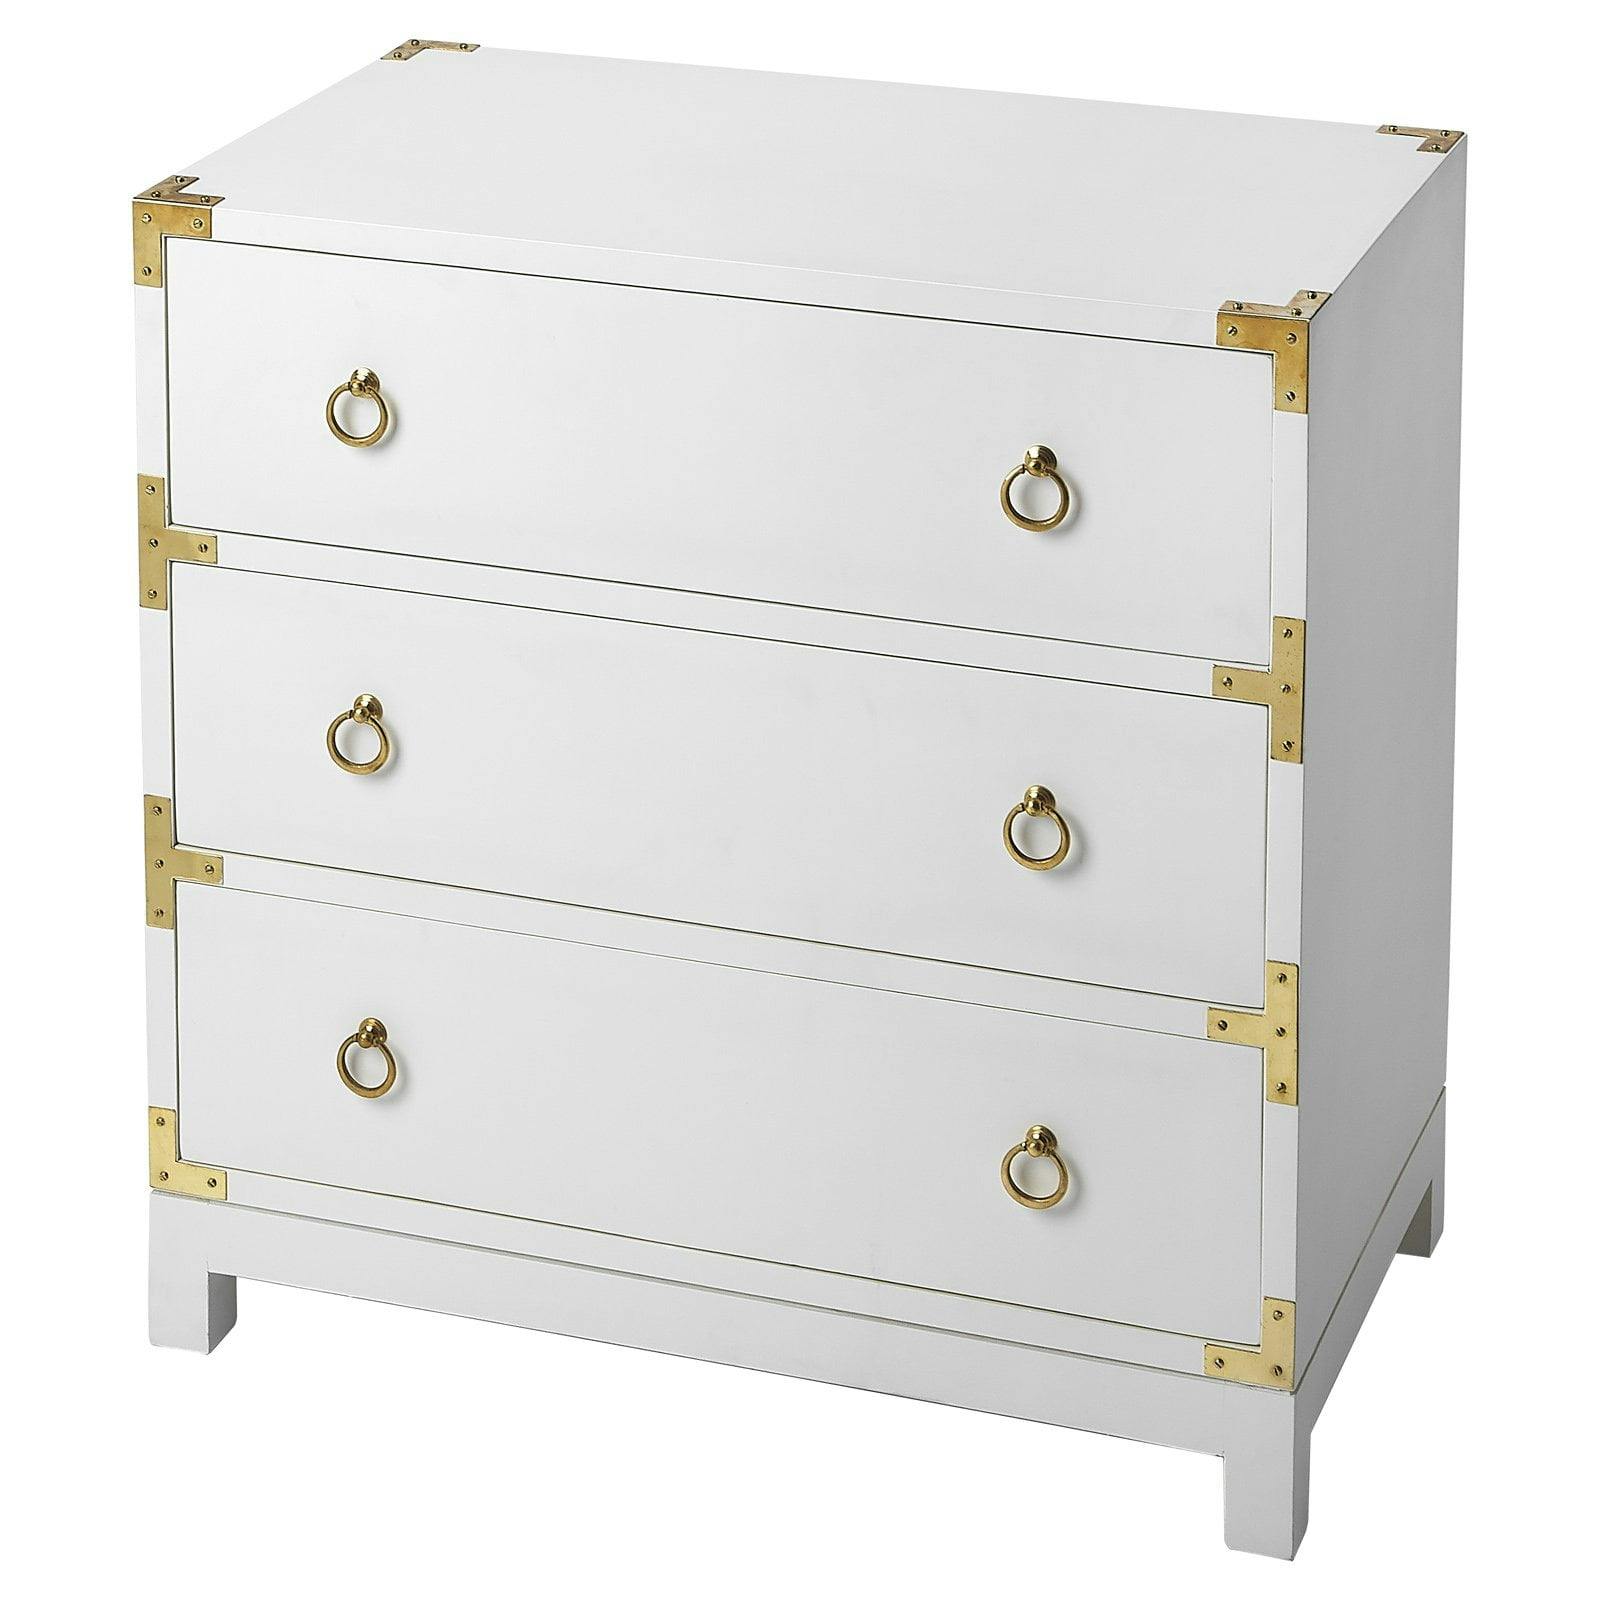 Forster Glossy White 3-Drawer Accent Chest with Steel Accents